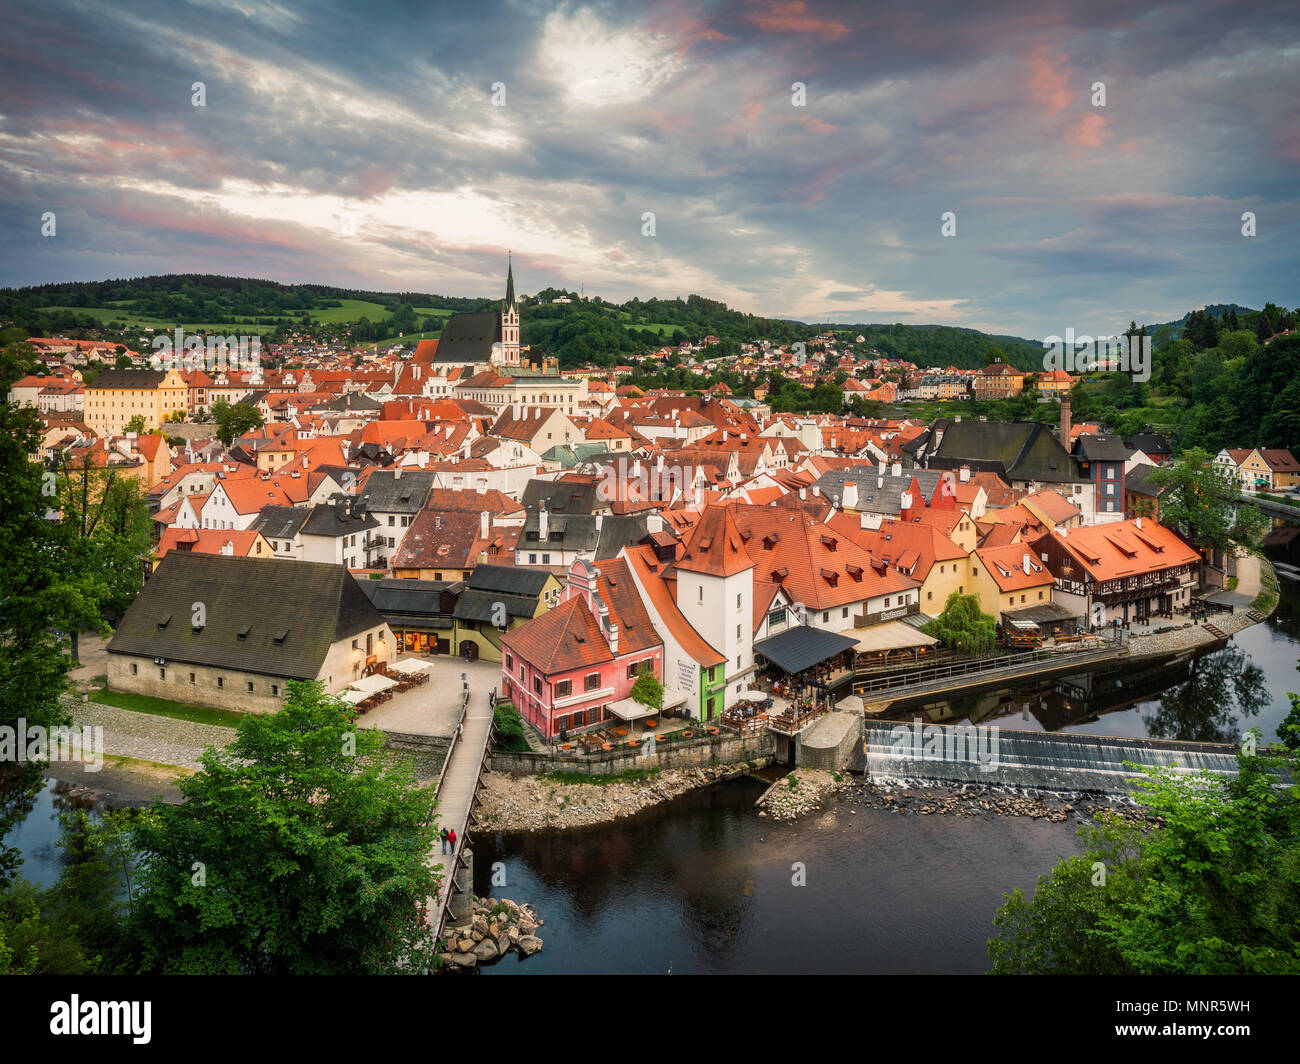 Colourful cloudy twilight sky over the picturesque town of Cesky Kumlov, Czech Republic, Europe Stock Photo